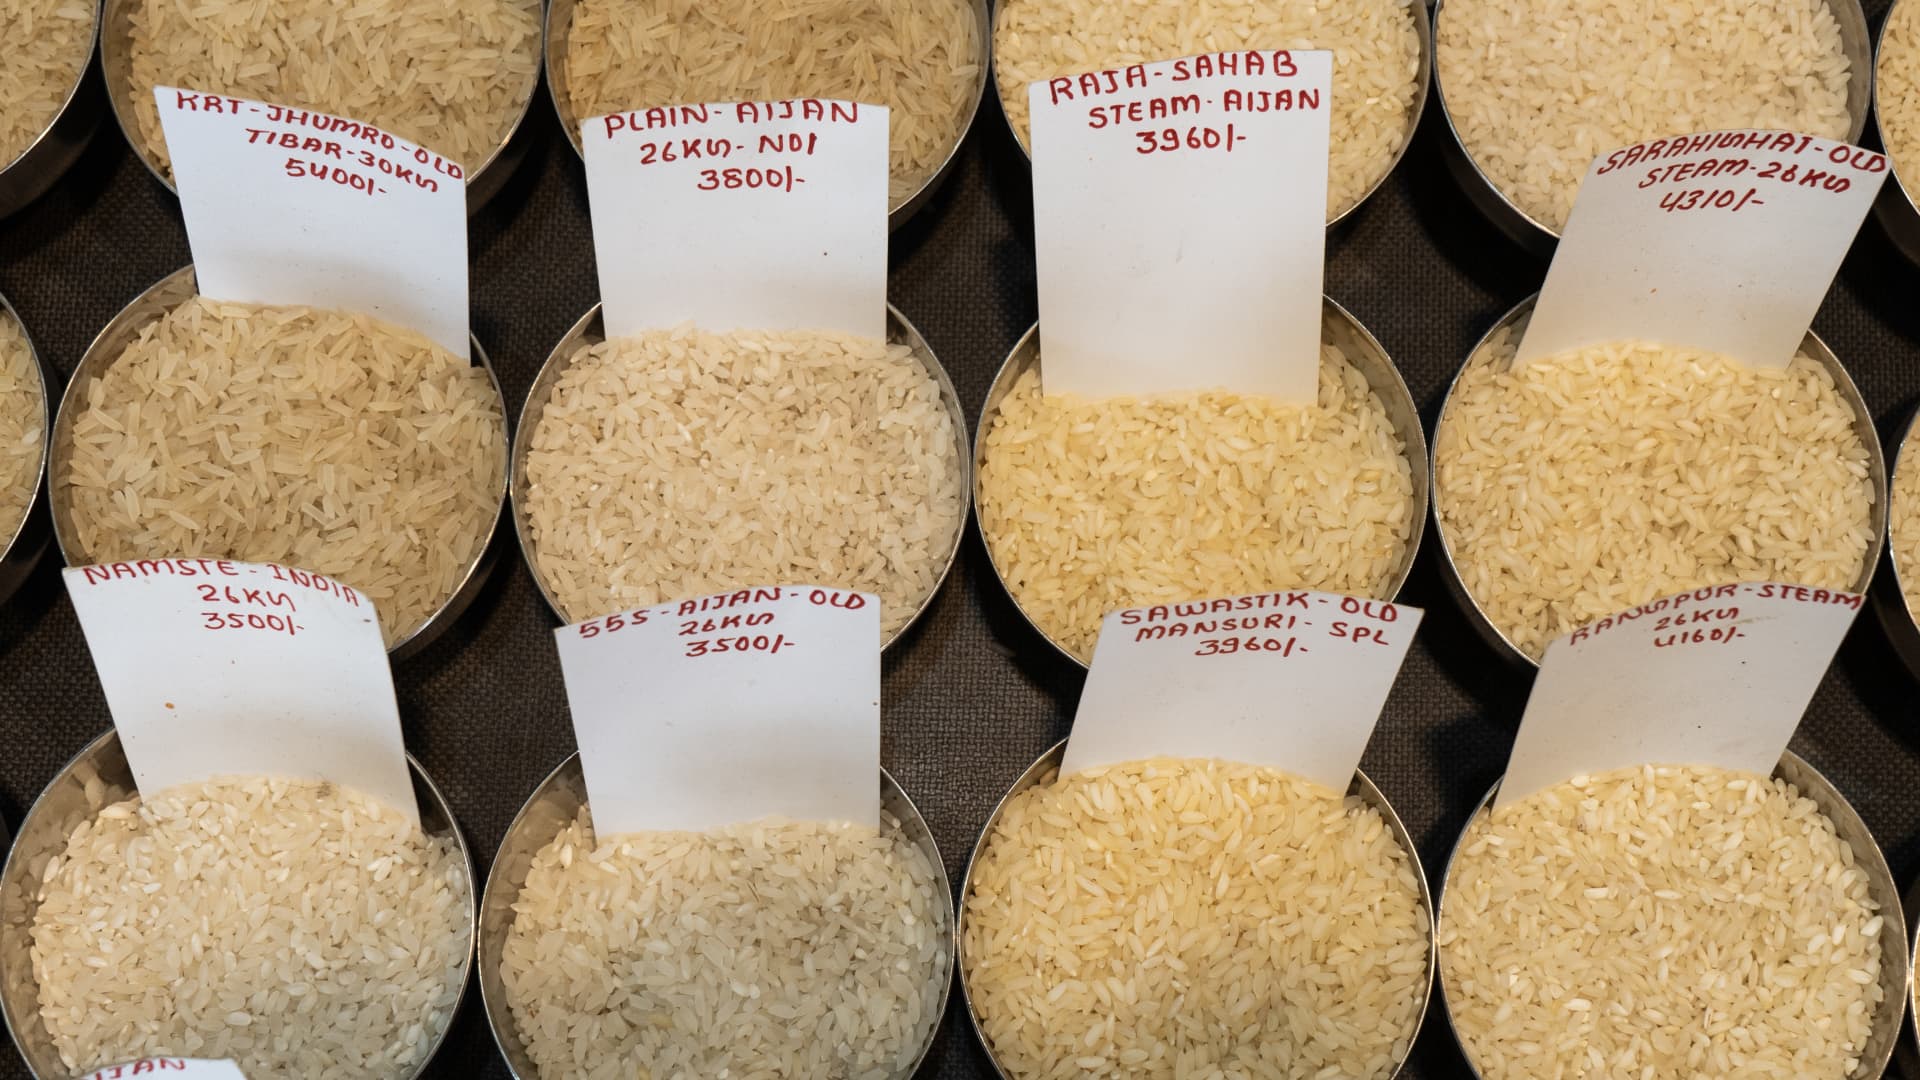 Global rice markets are in crisis amid ‘artificial’ shortage